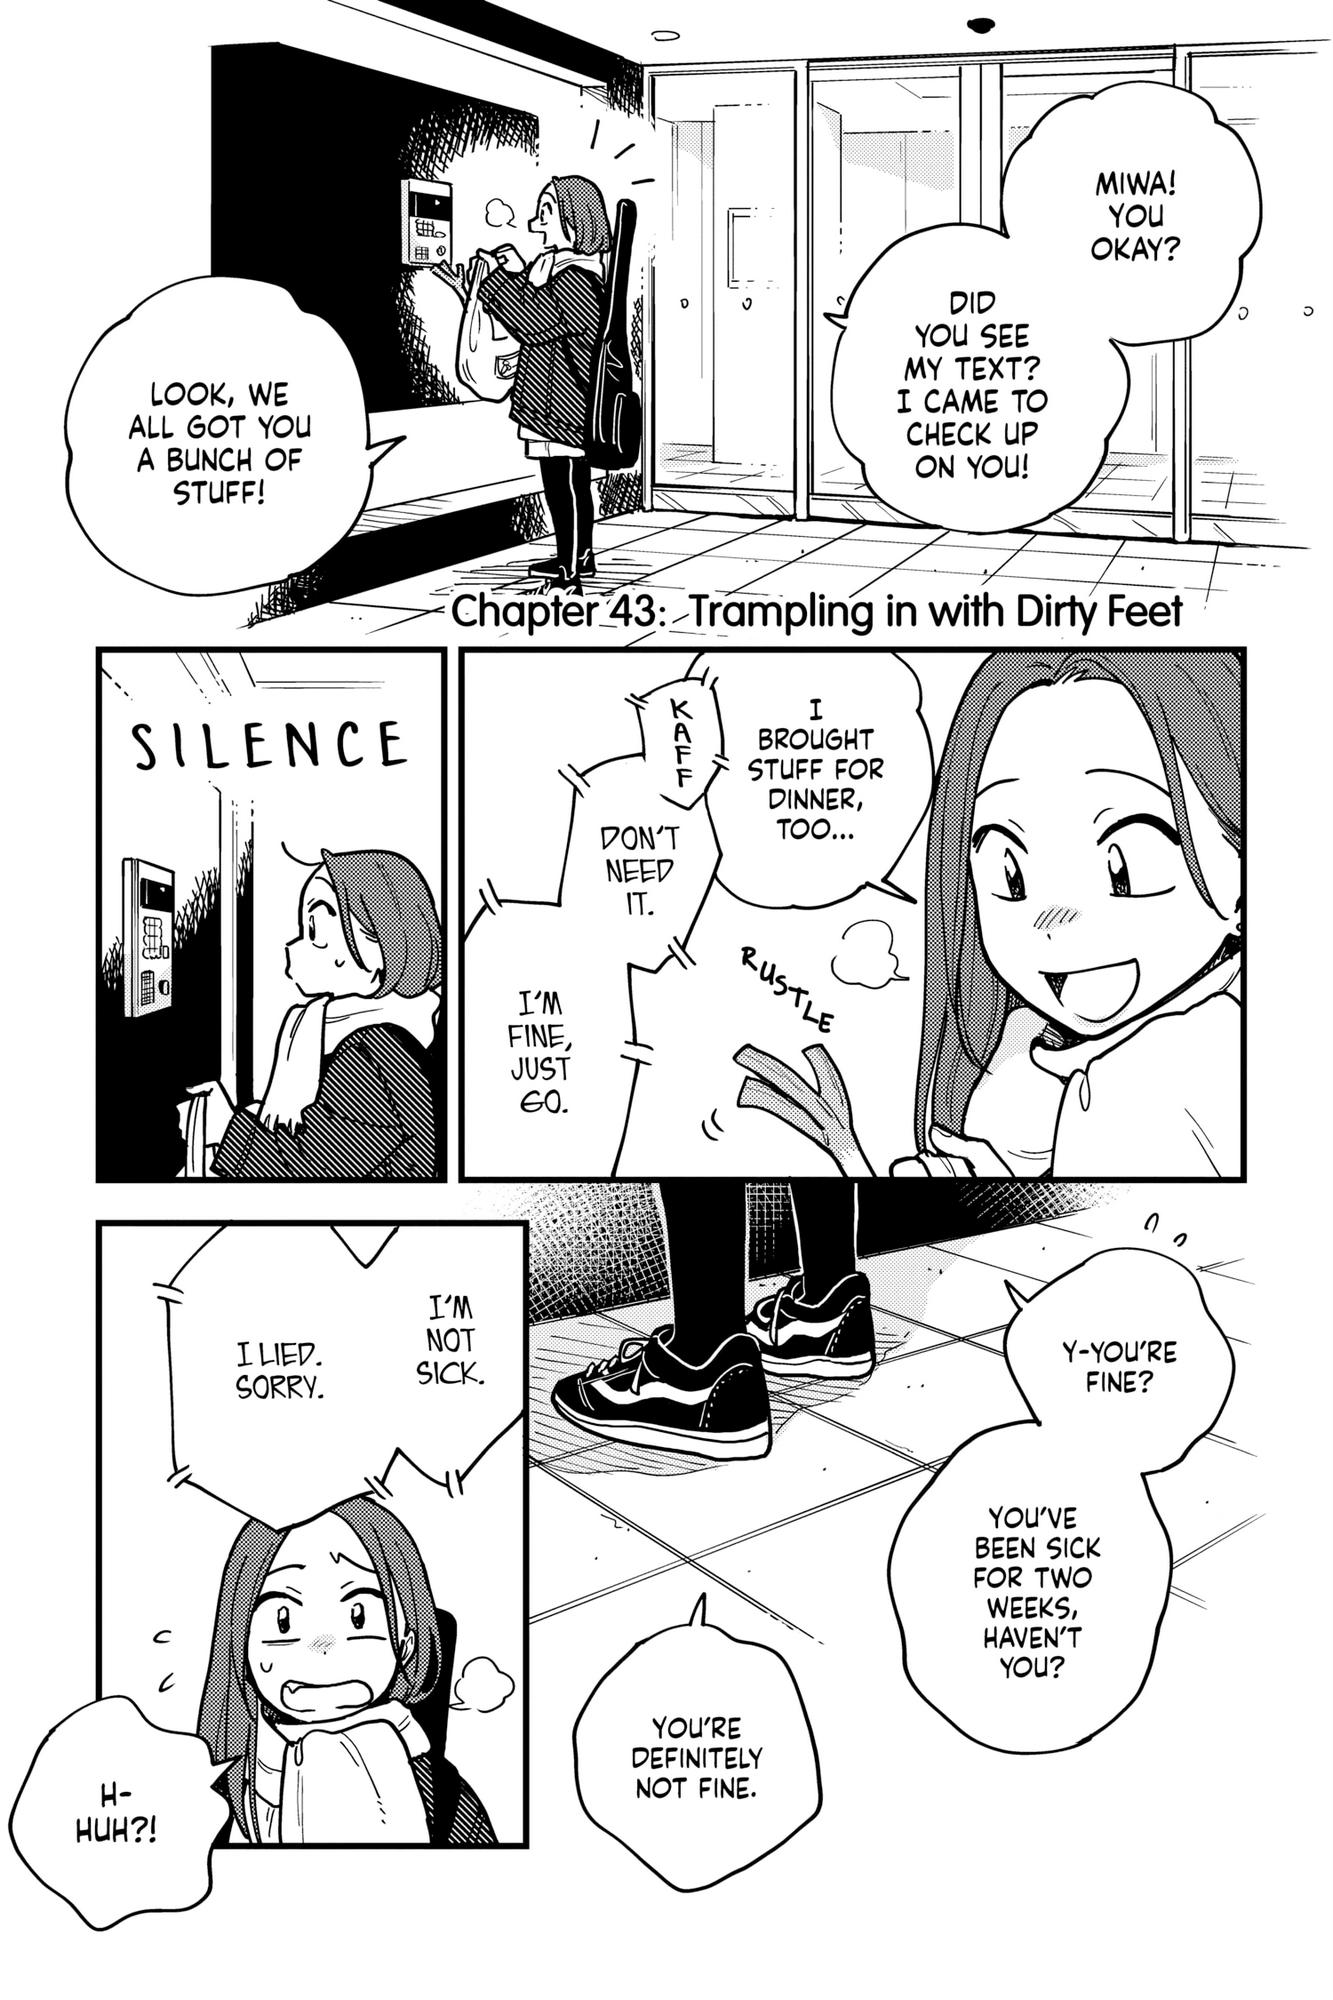 So, Do You Wanna Go Out, Or? Chapter 43 #2